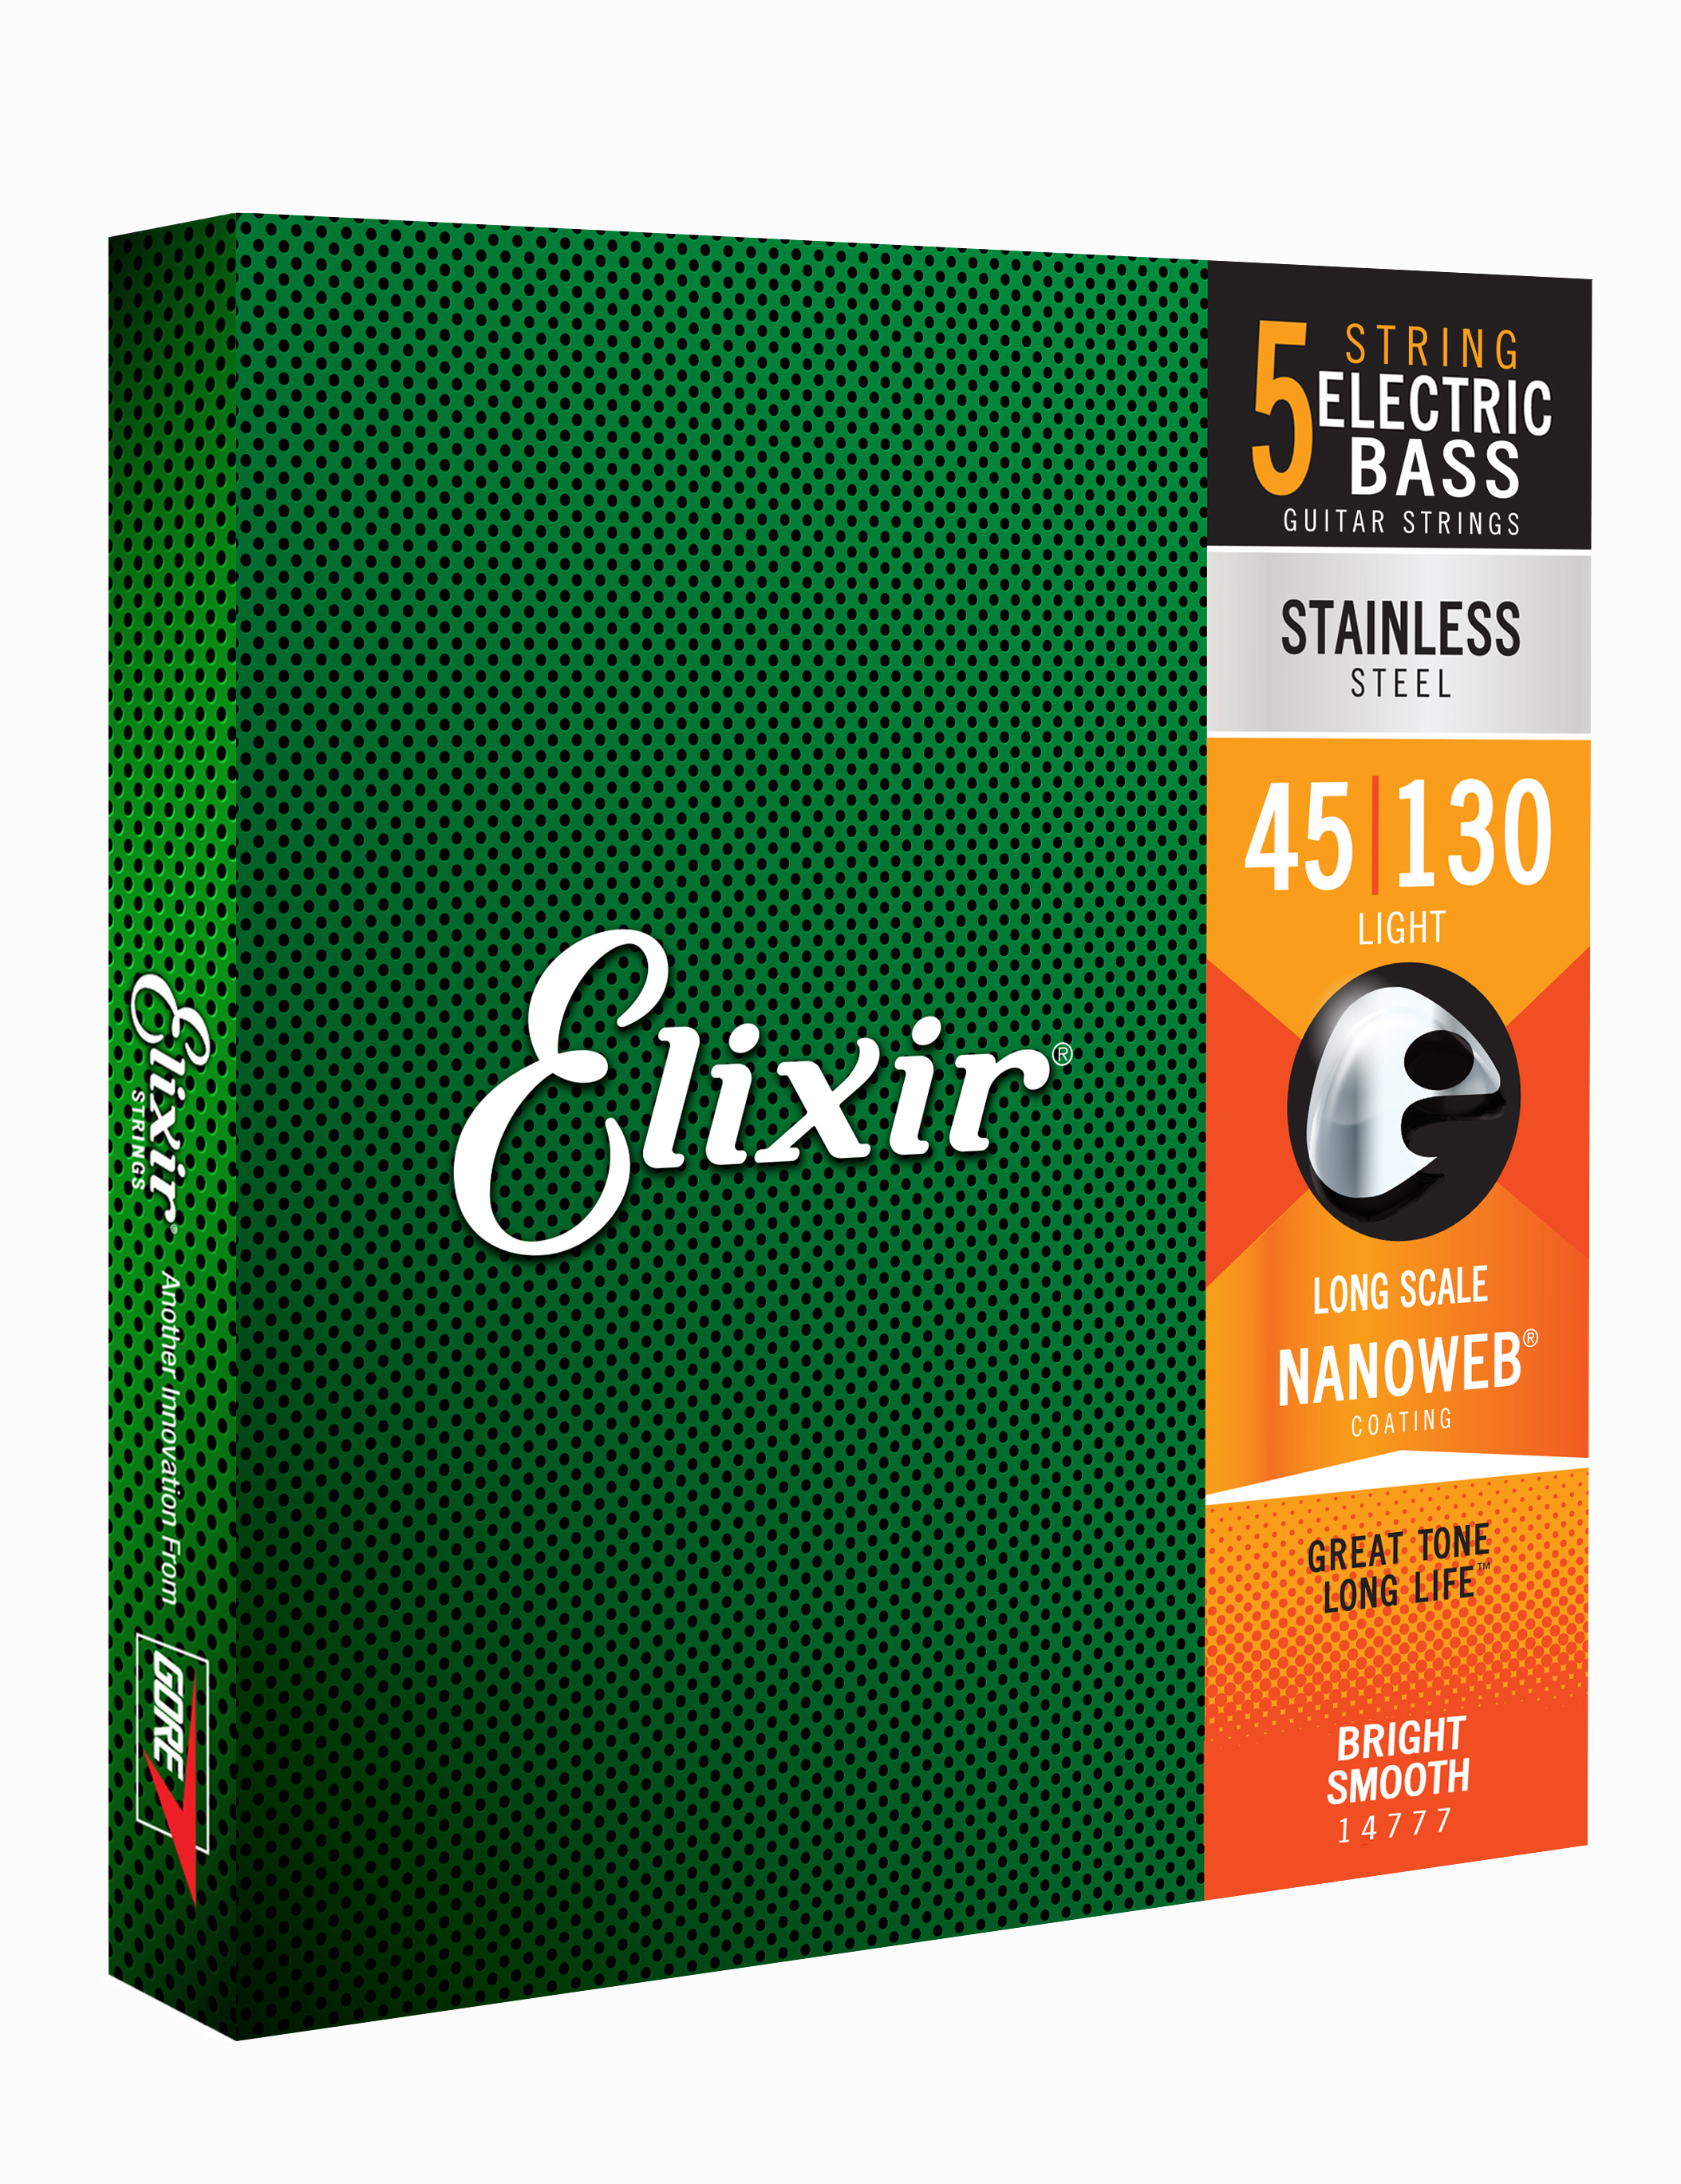 Elixir 14777 Nanoweb Stainless Steel Long Scale Electric Bass Light 5c 40-135 - Electric bass strings - Variation 1